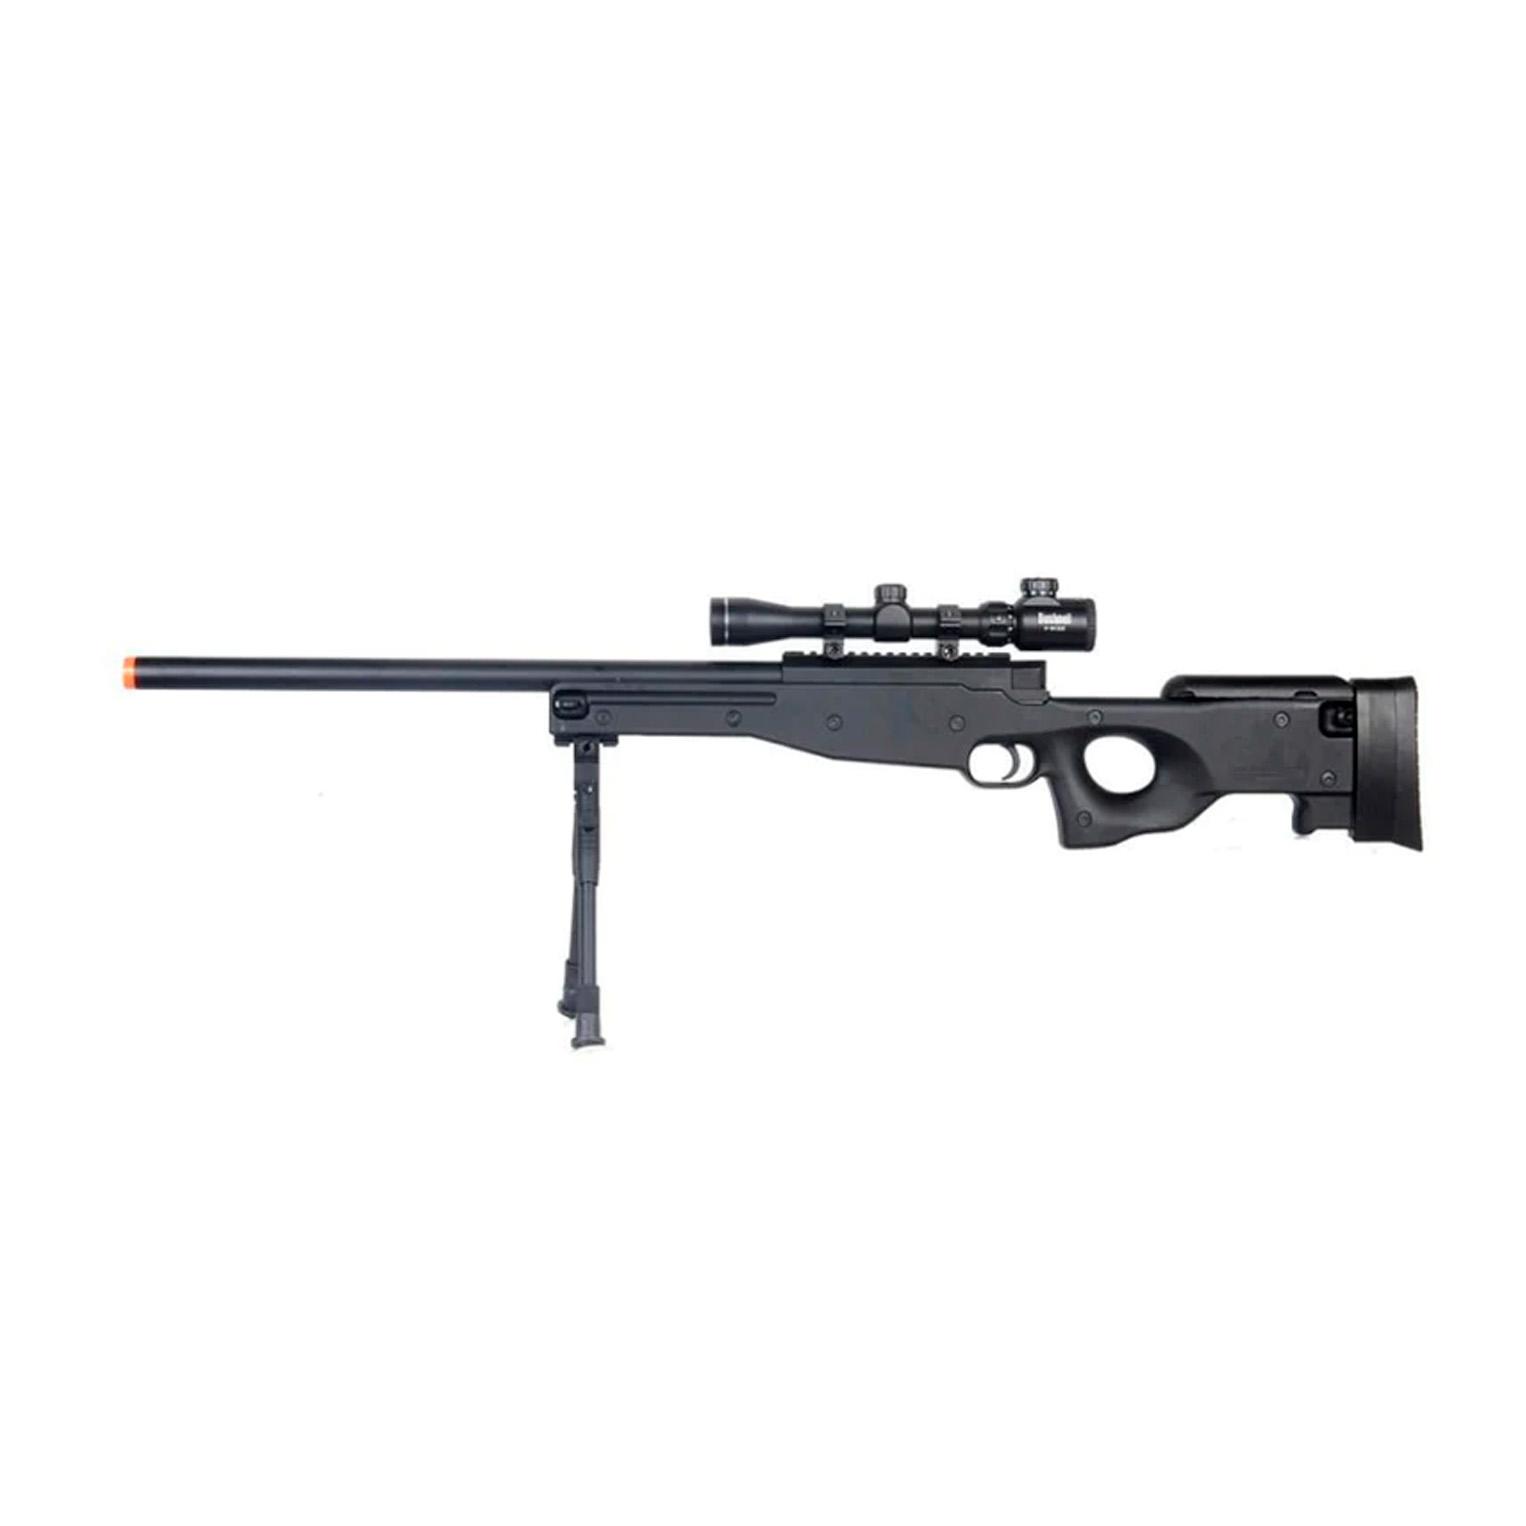 Double Eagle M59P Airsoft Sniper Rifle w/ Scope and Bipod